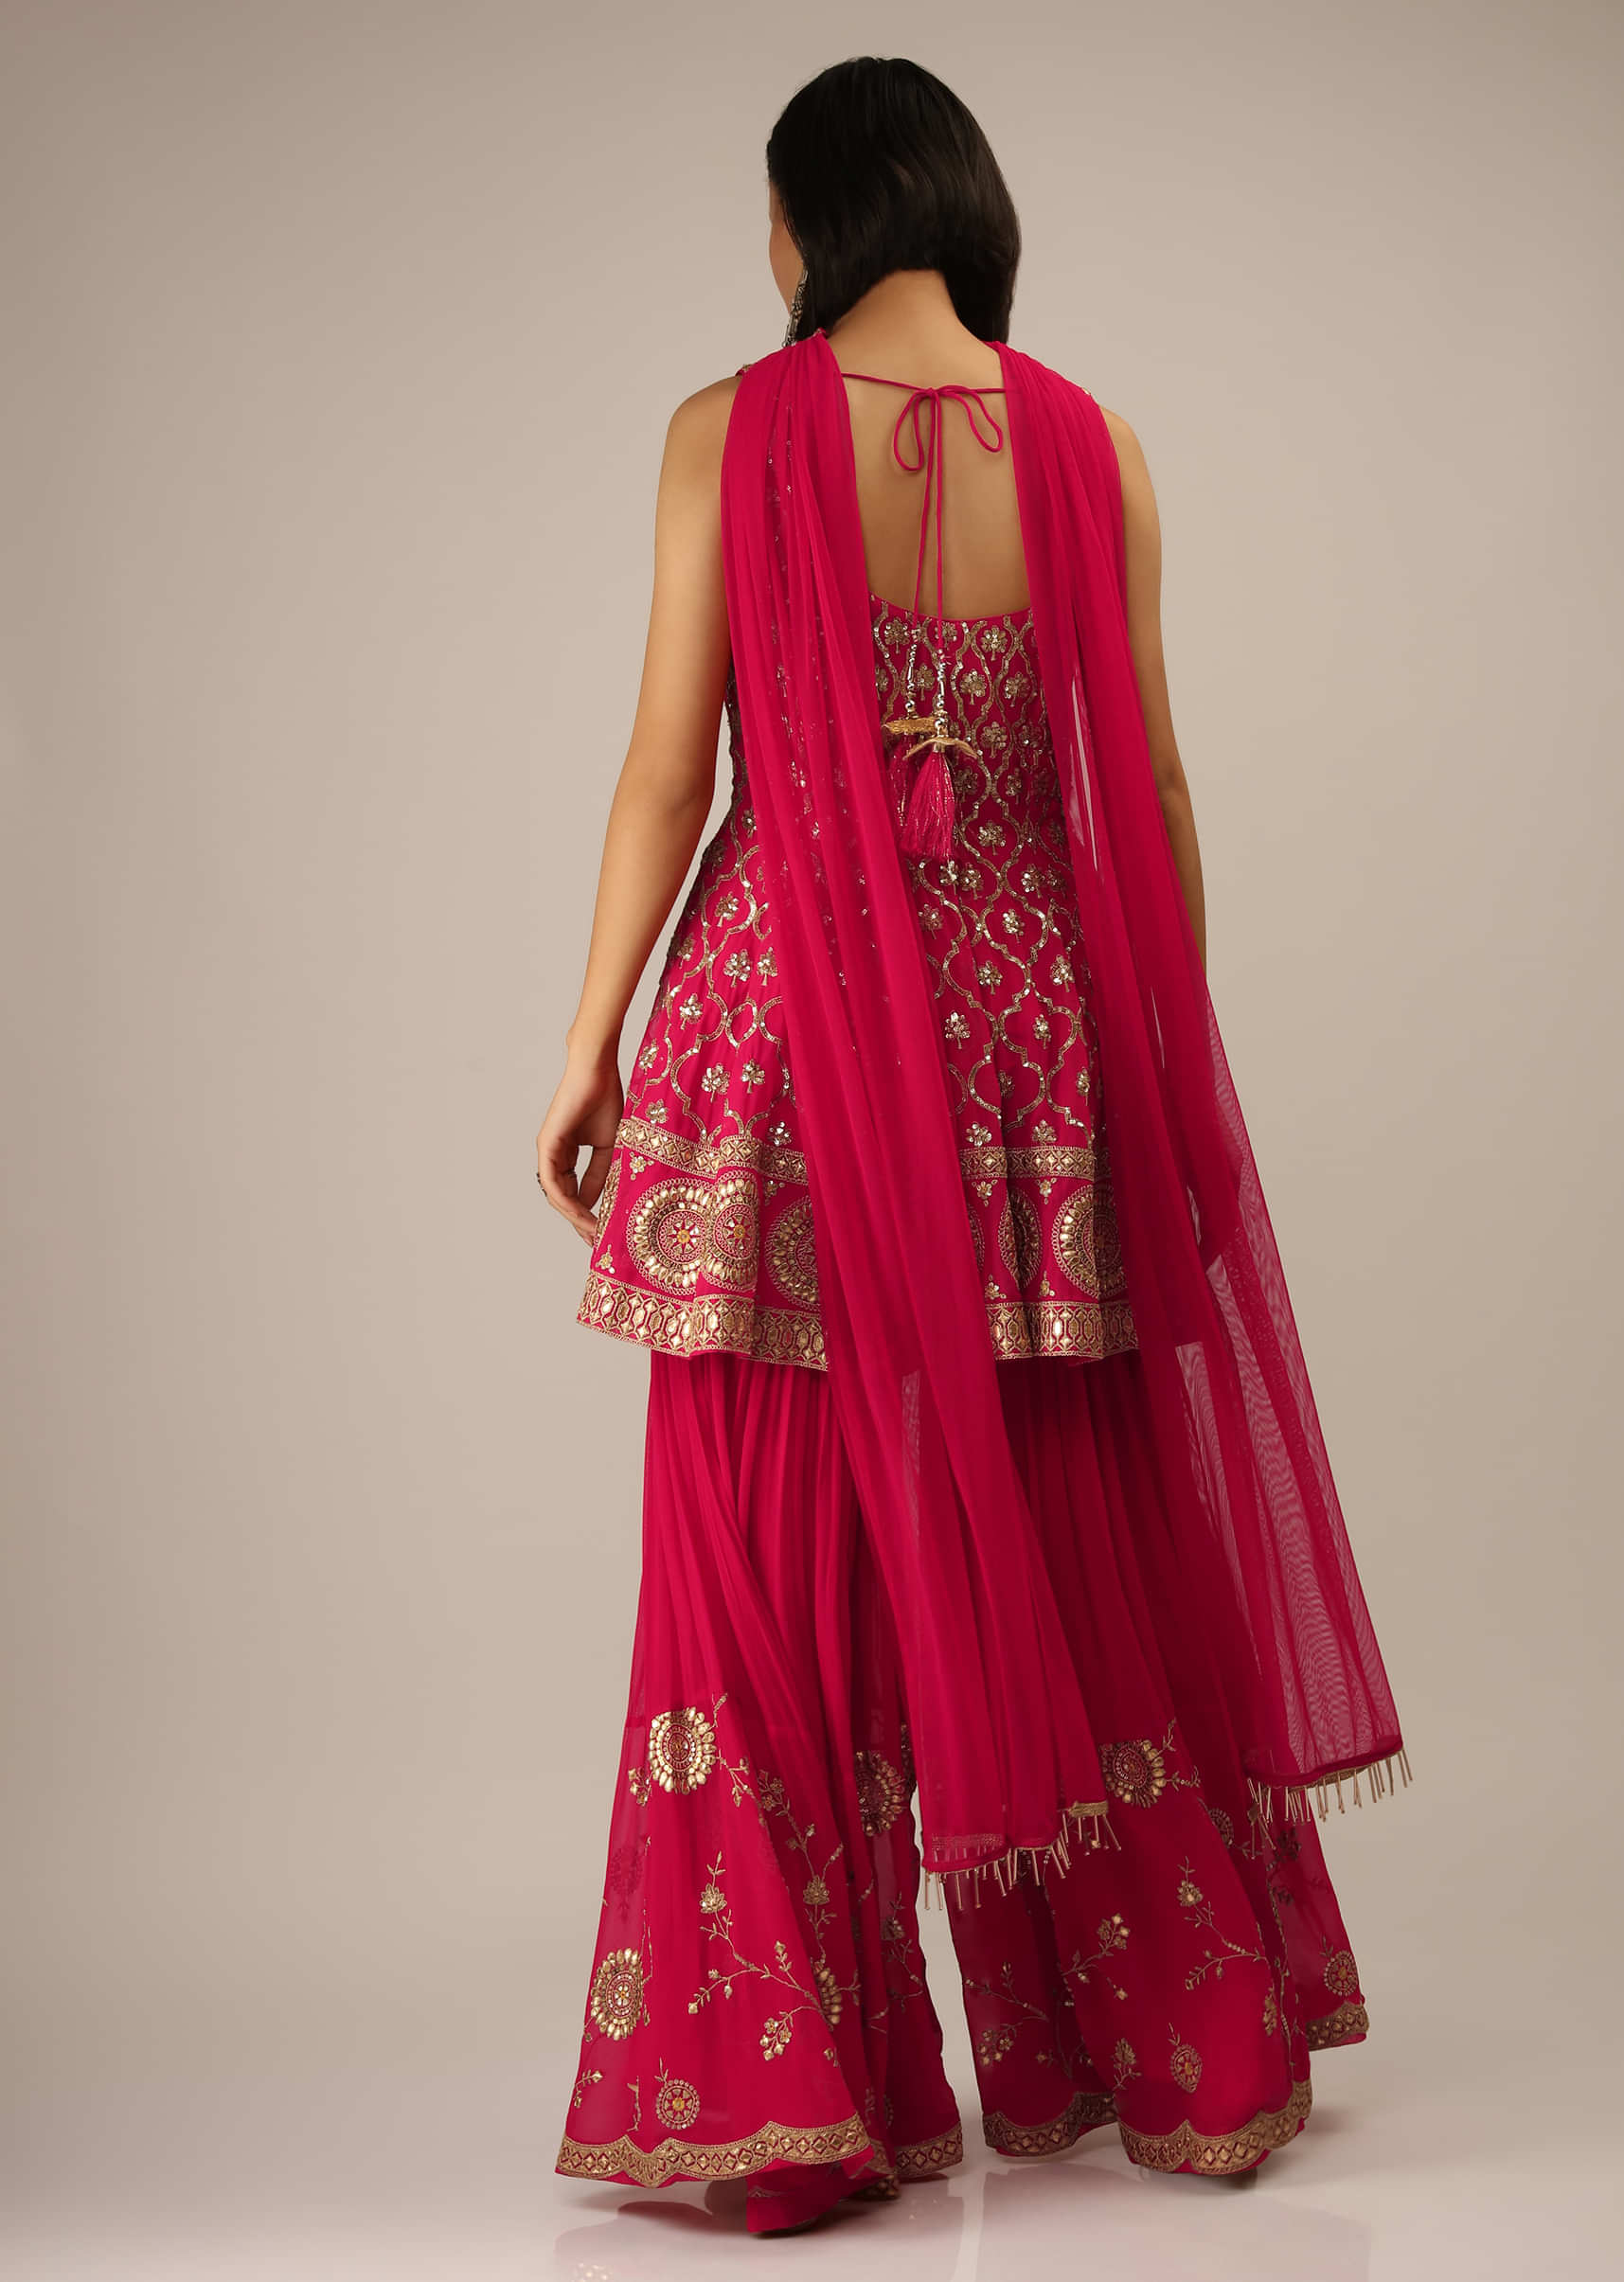 Rani Pink Sharara And Peplum Suit With Moroccan Jaal Embroidery And Gotta Highlights